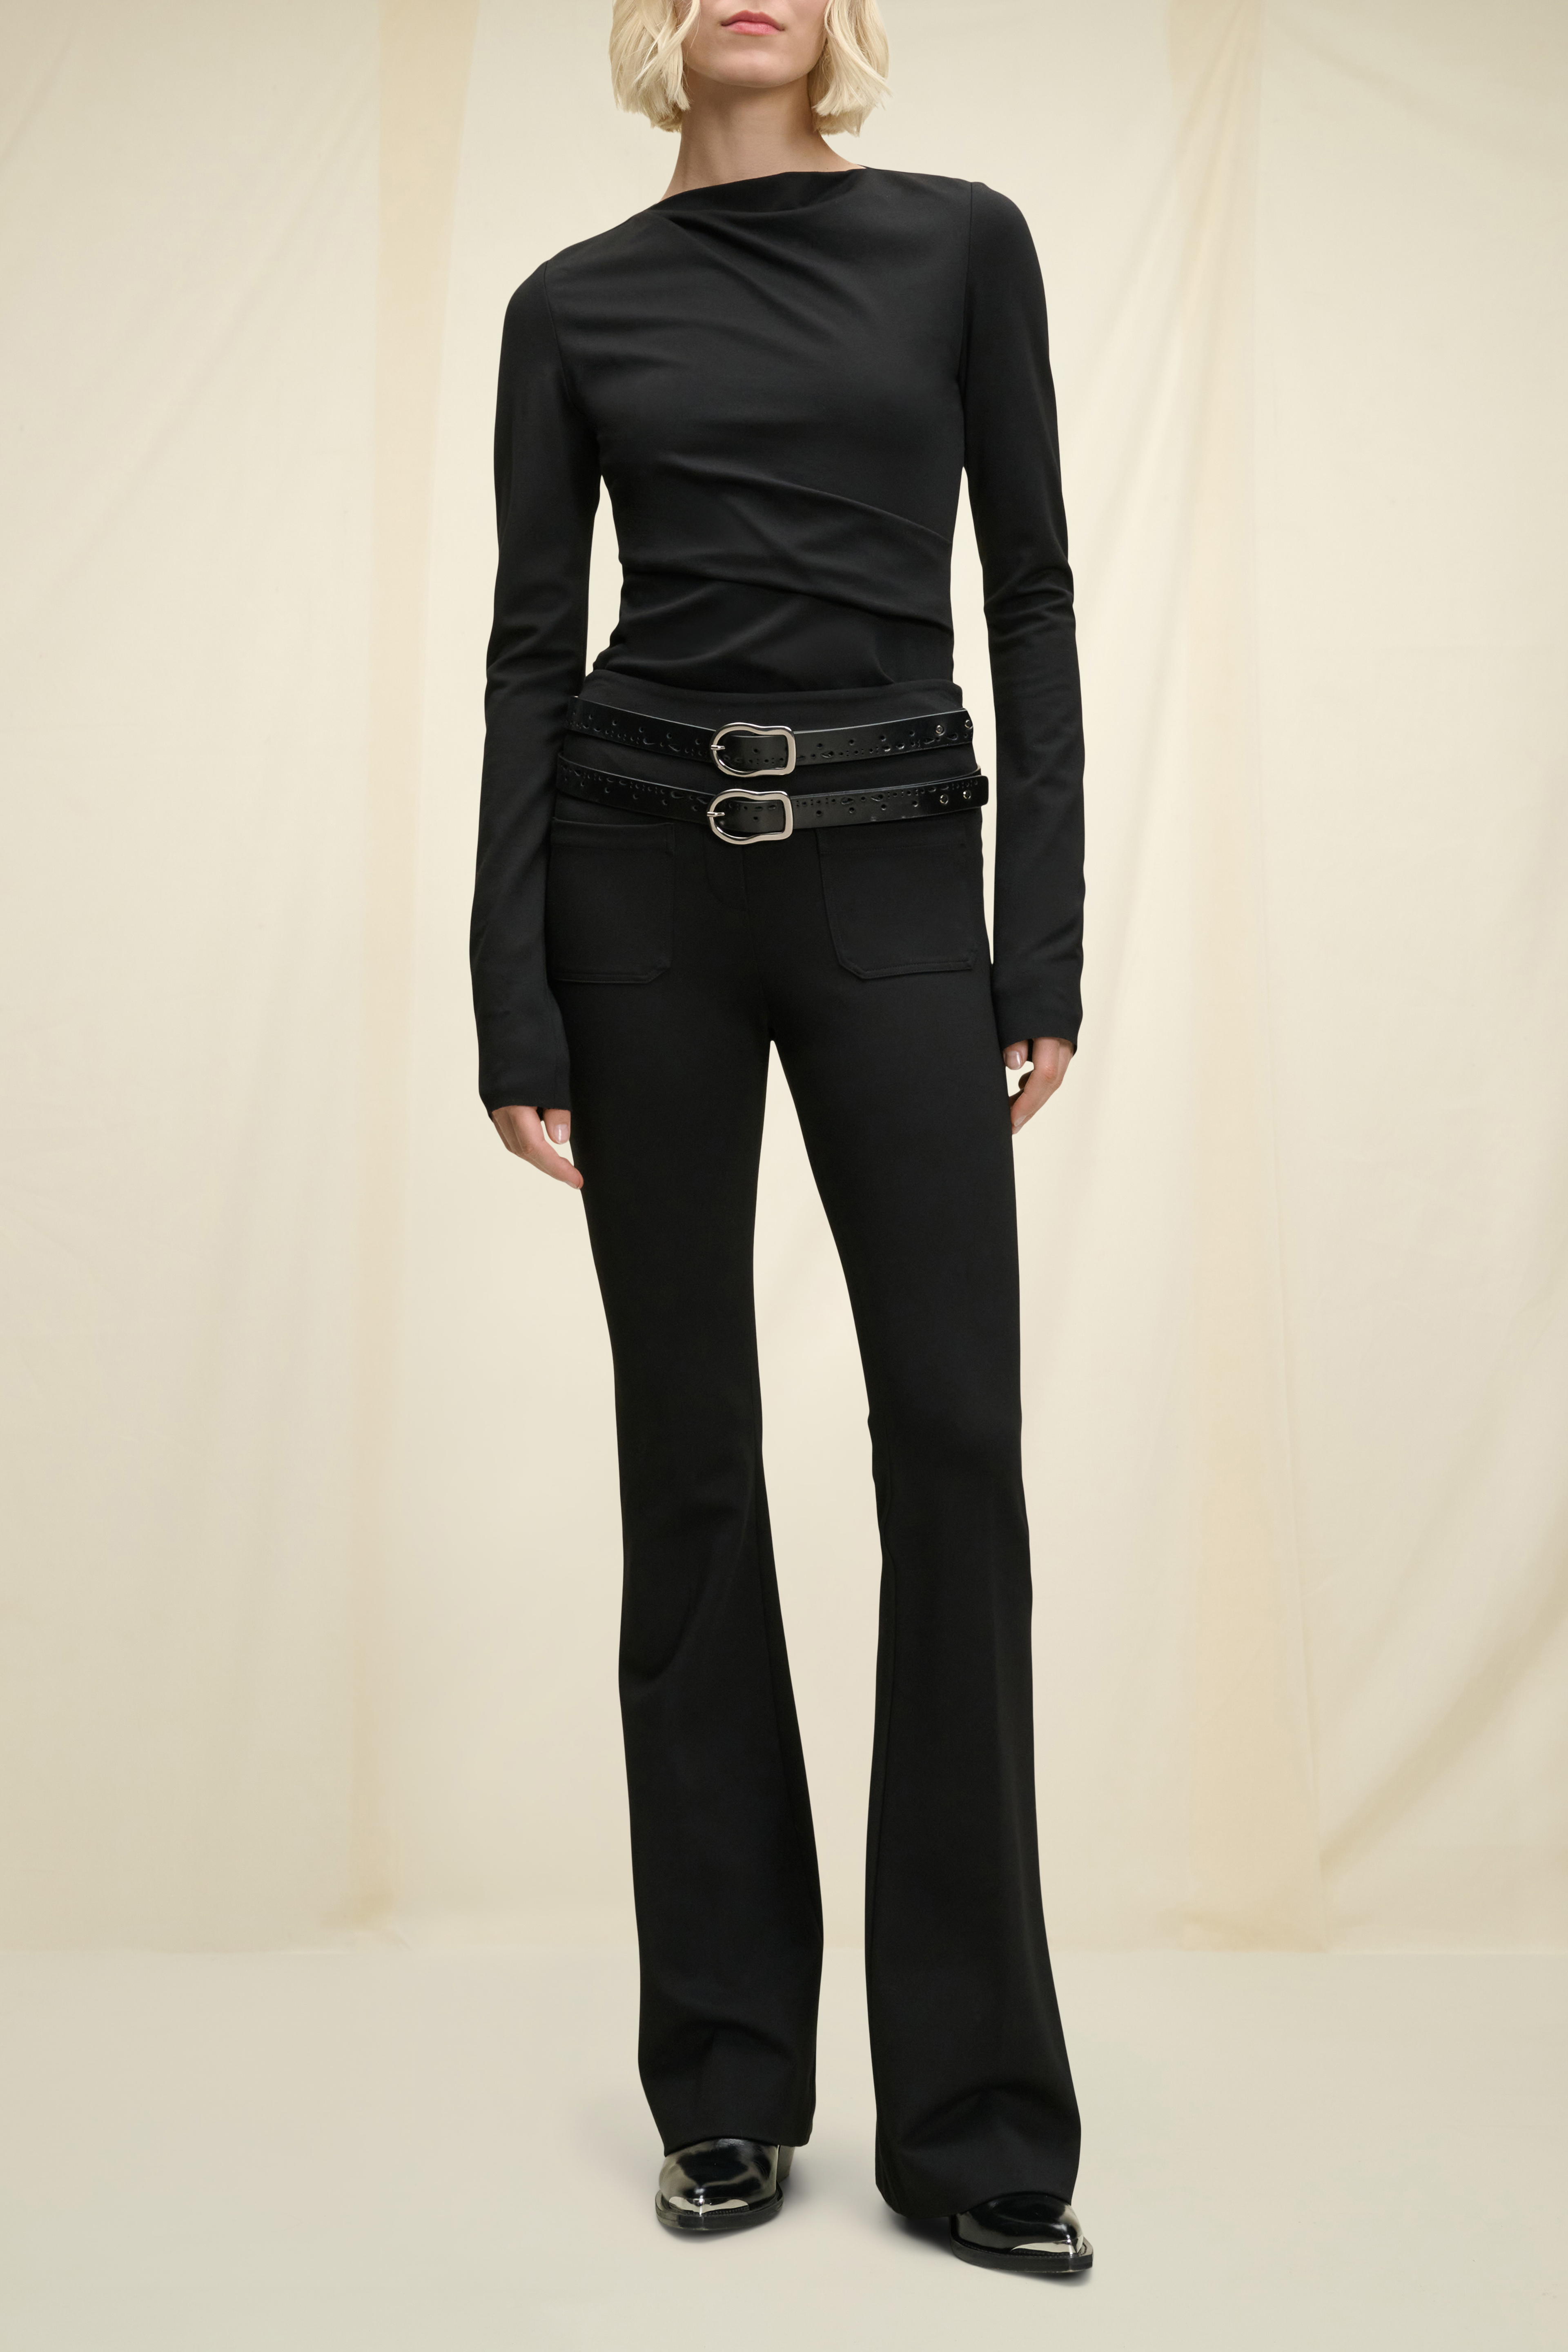 Dorothee Schumacher Double belt with cut-out details